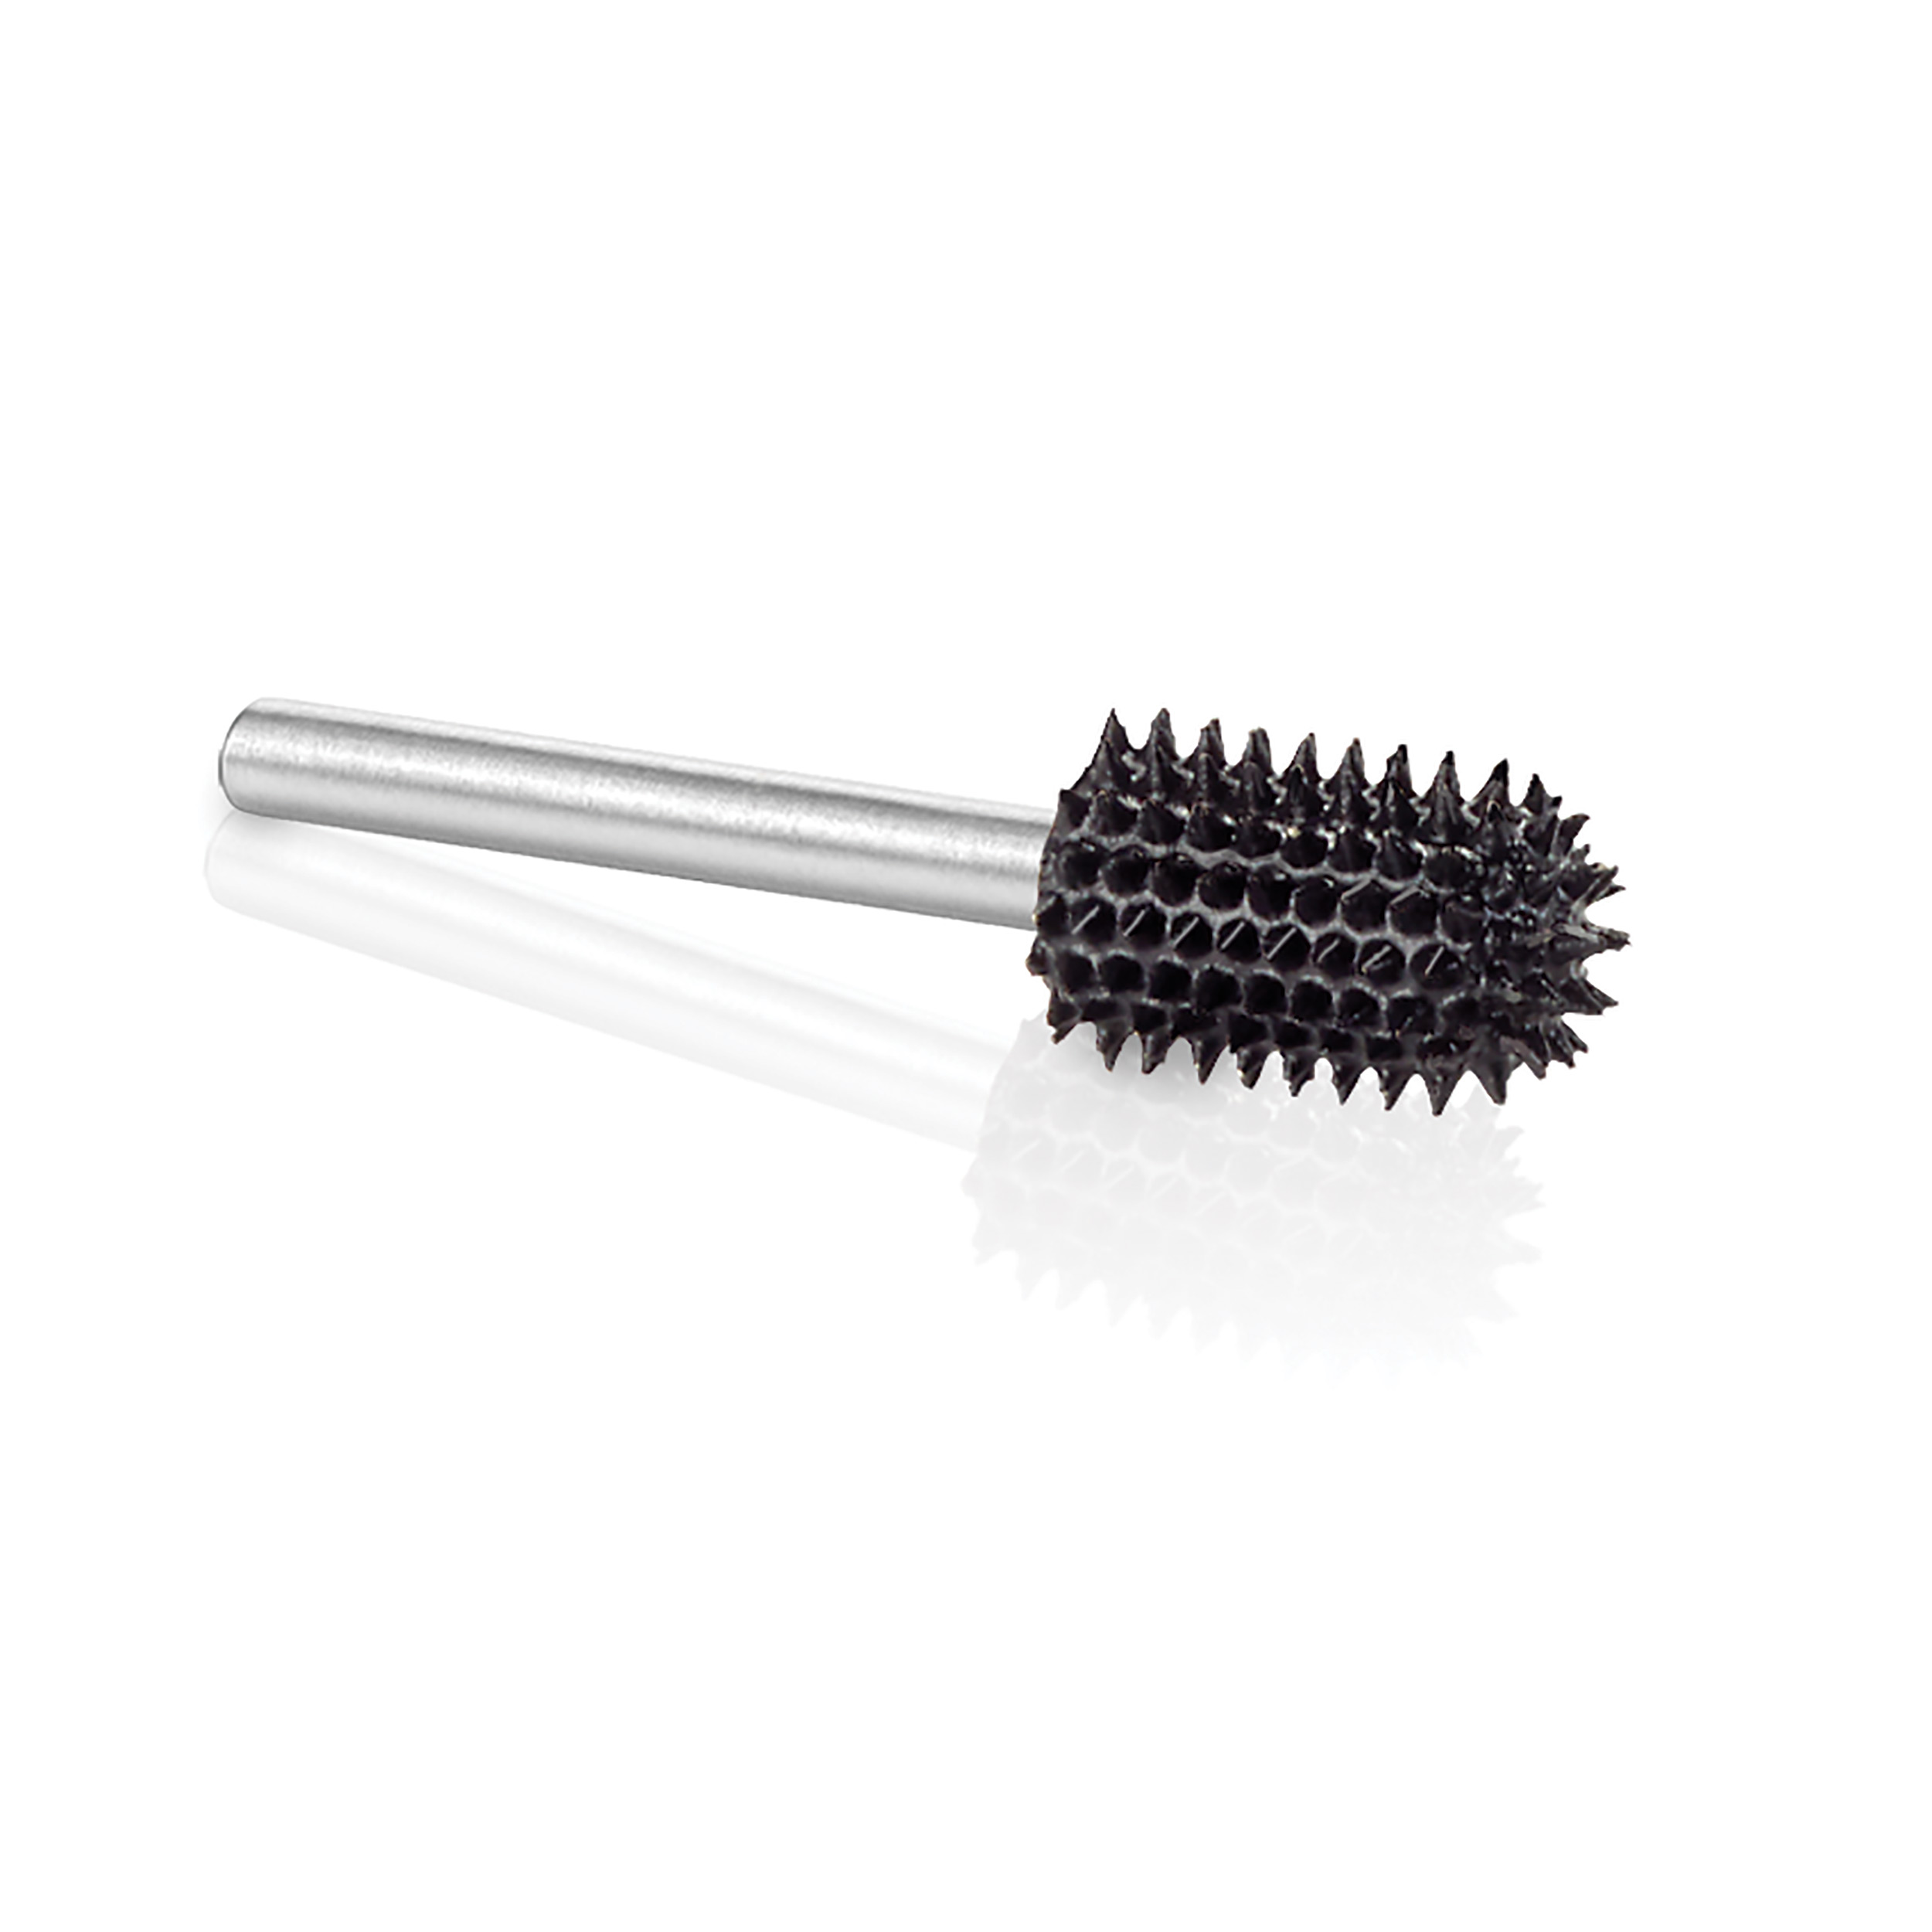 Extreme Ball Nose Burr, 1/8" Shaft, Very Coarse (1/4" X 1/2")